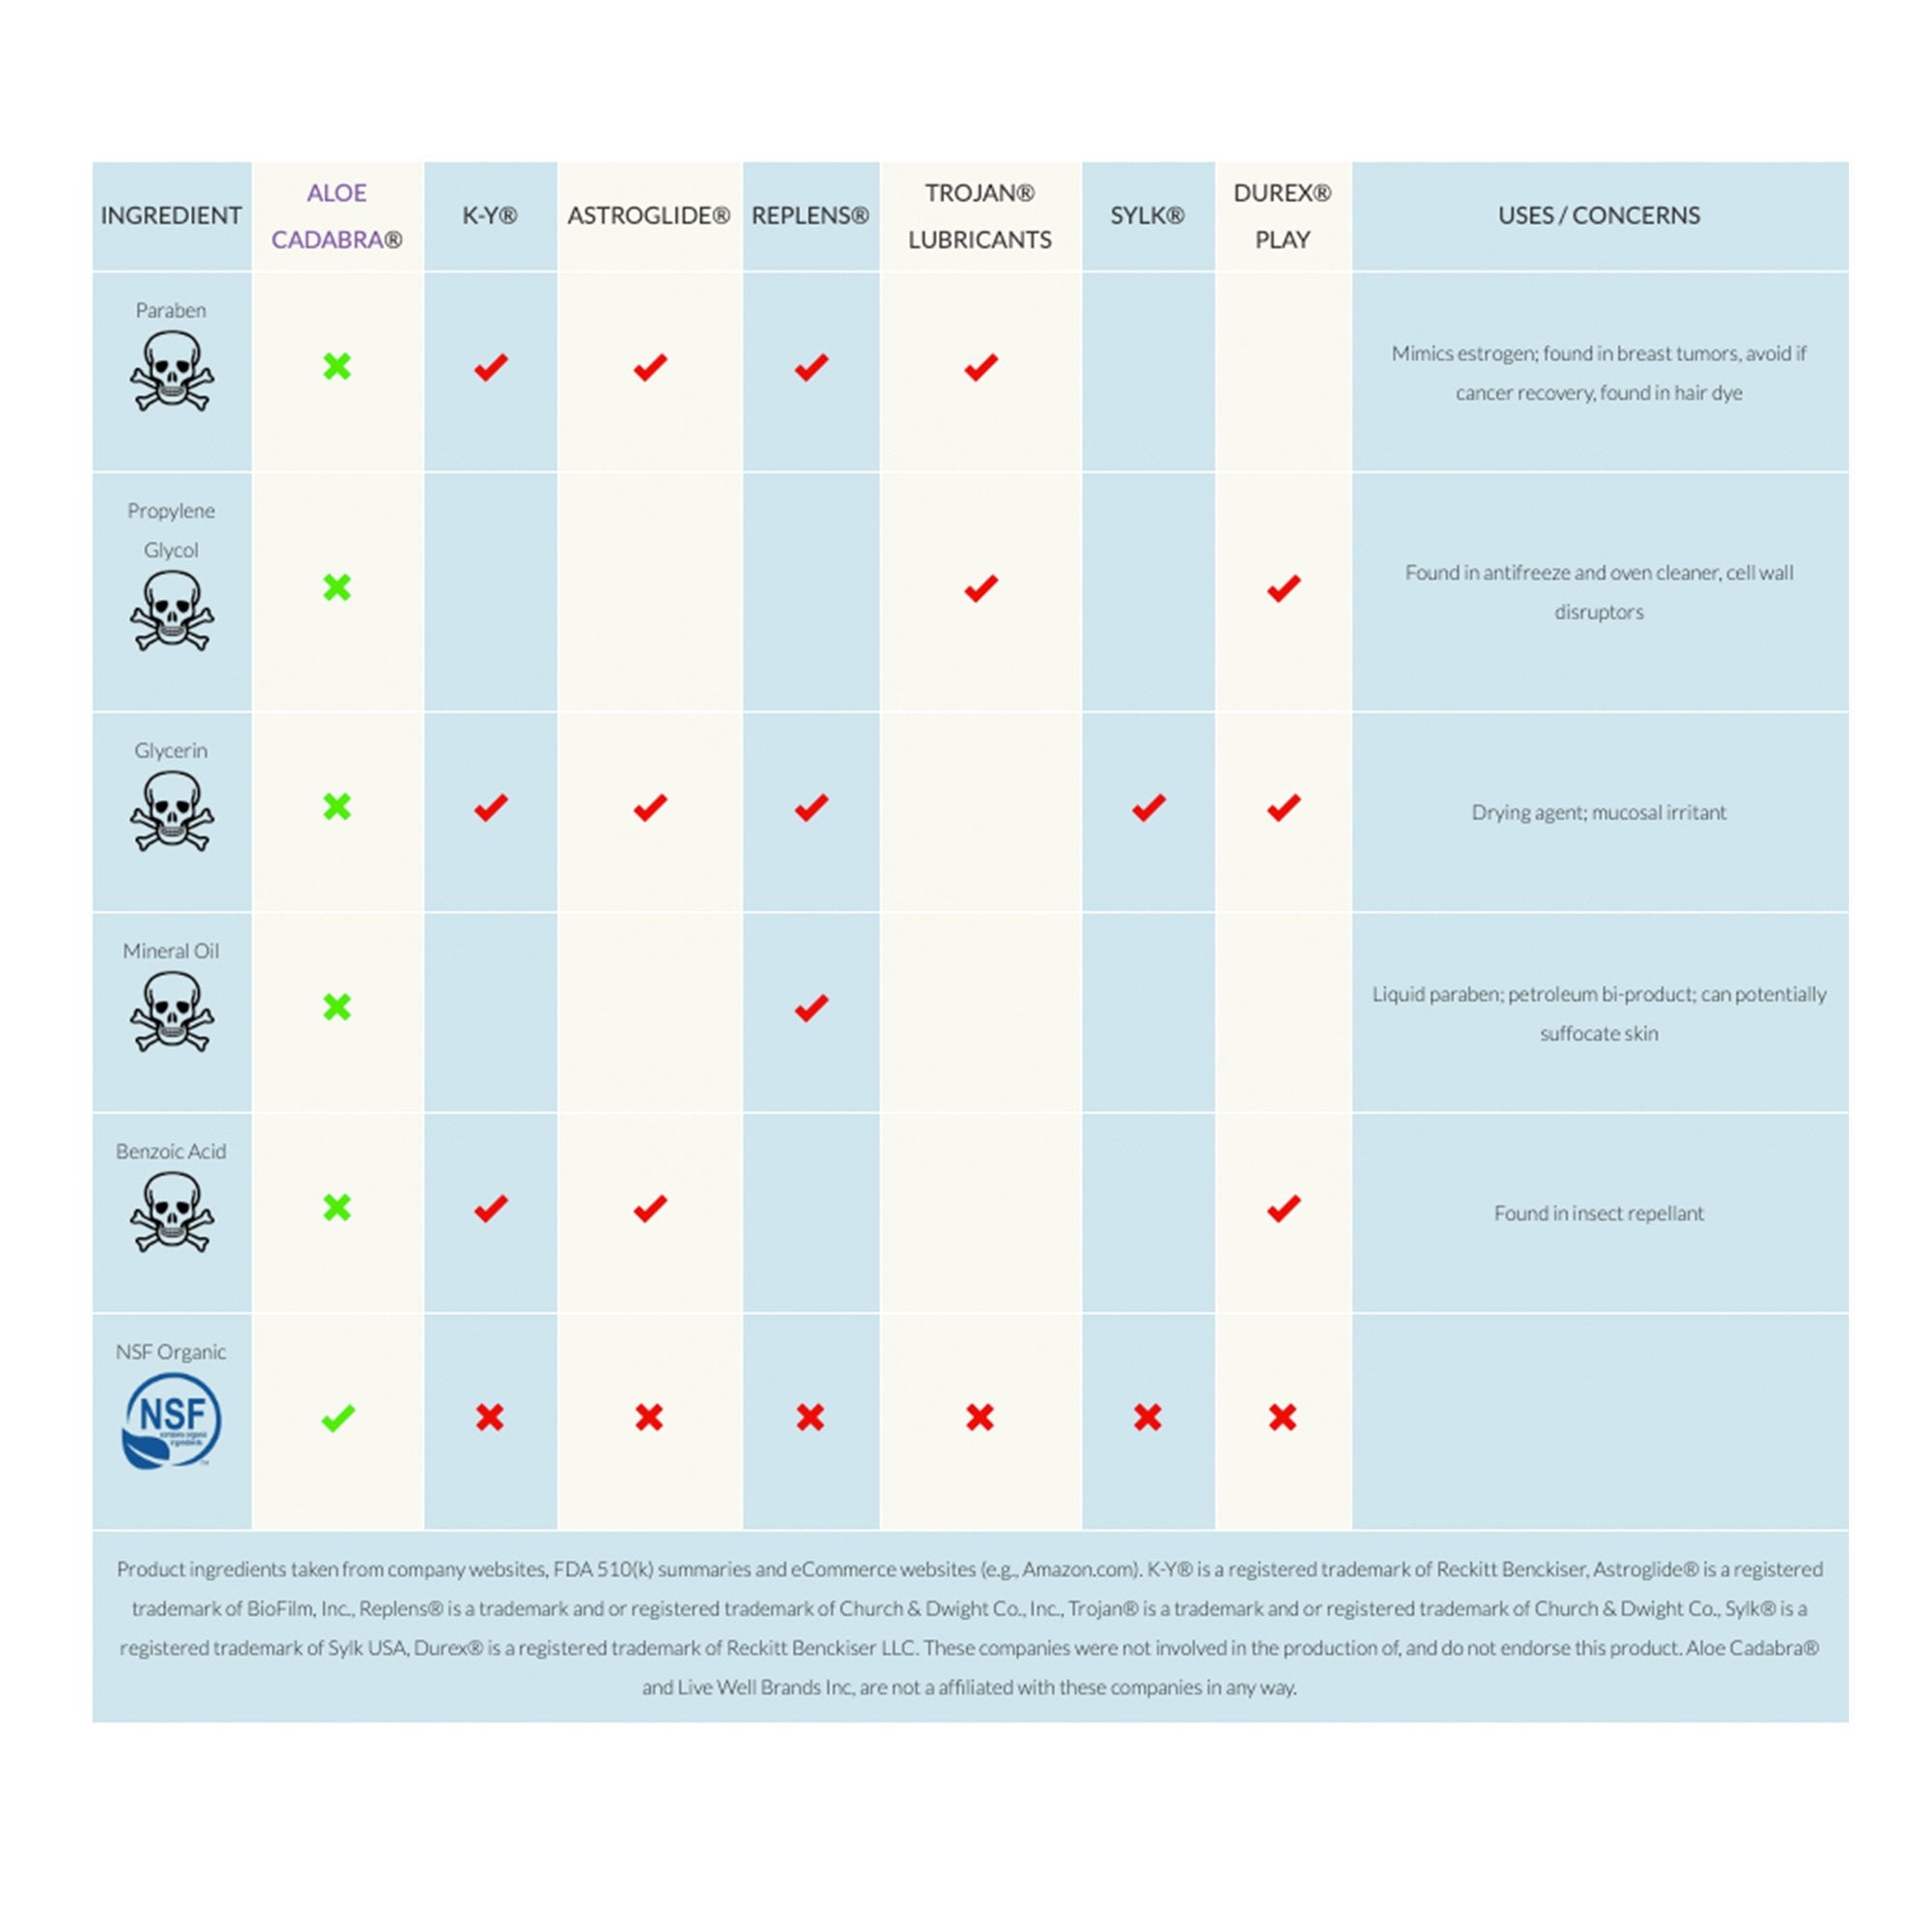 List of personal lubricants compared to aloe Cadabra product. Chart describes different toxins found in name brand lubricants, and lack of harmful chemicals in Aloe Cadabra product